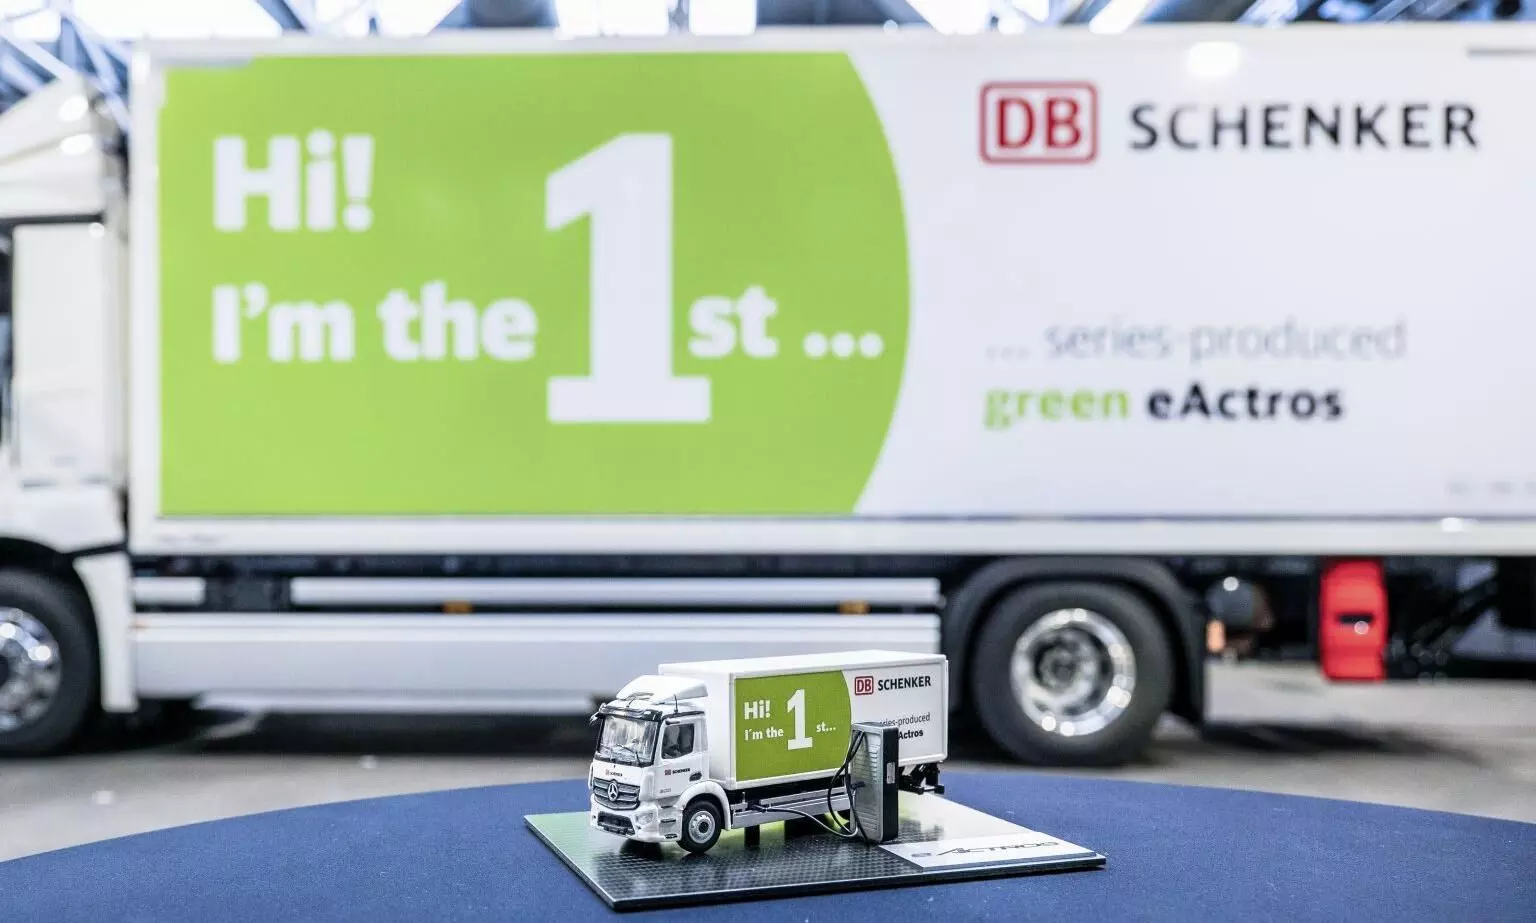 DB Schenker first to take delivery of 19 tonne Mercedes-Benz eActros